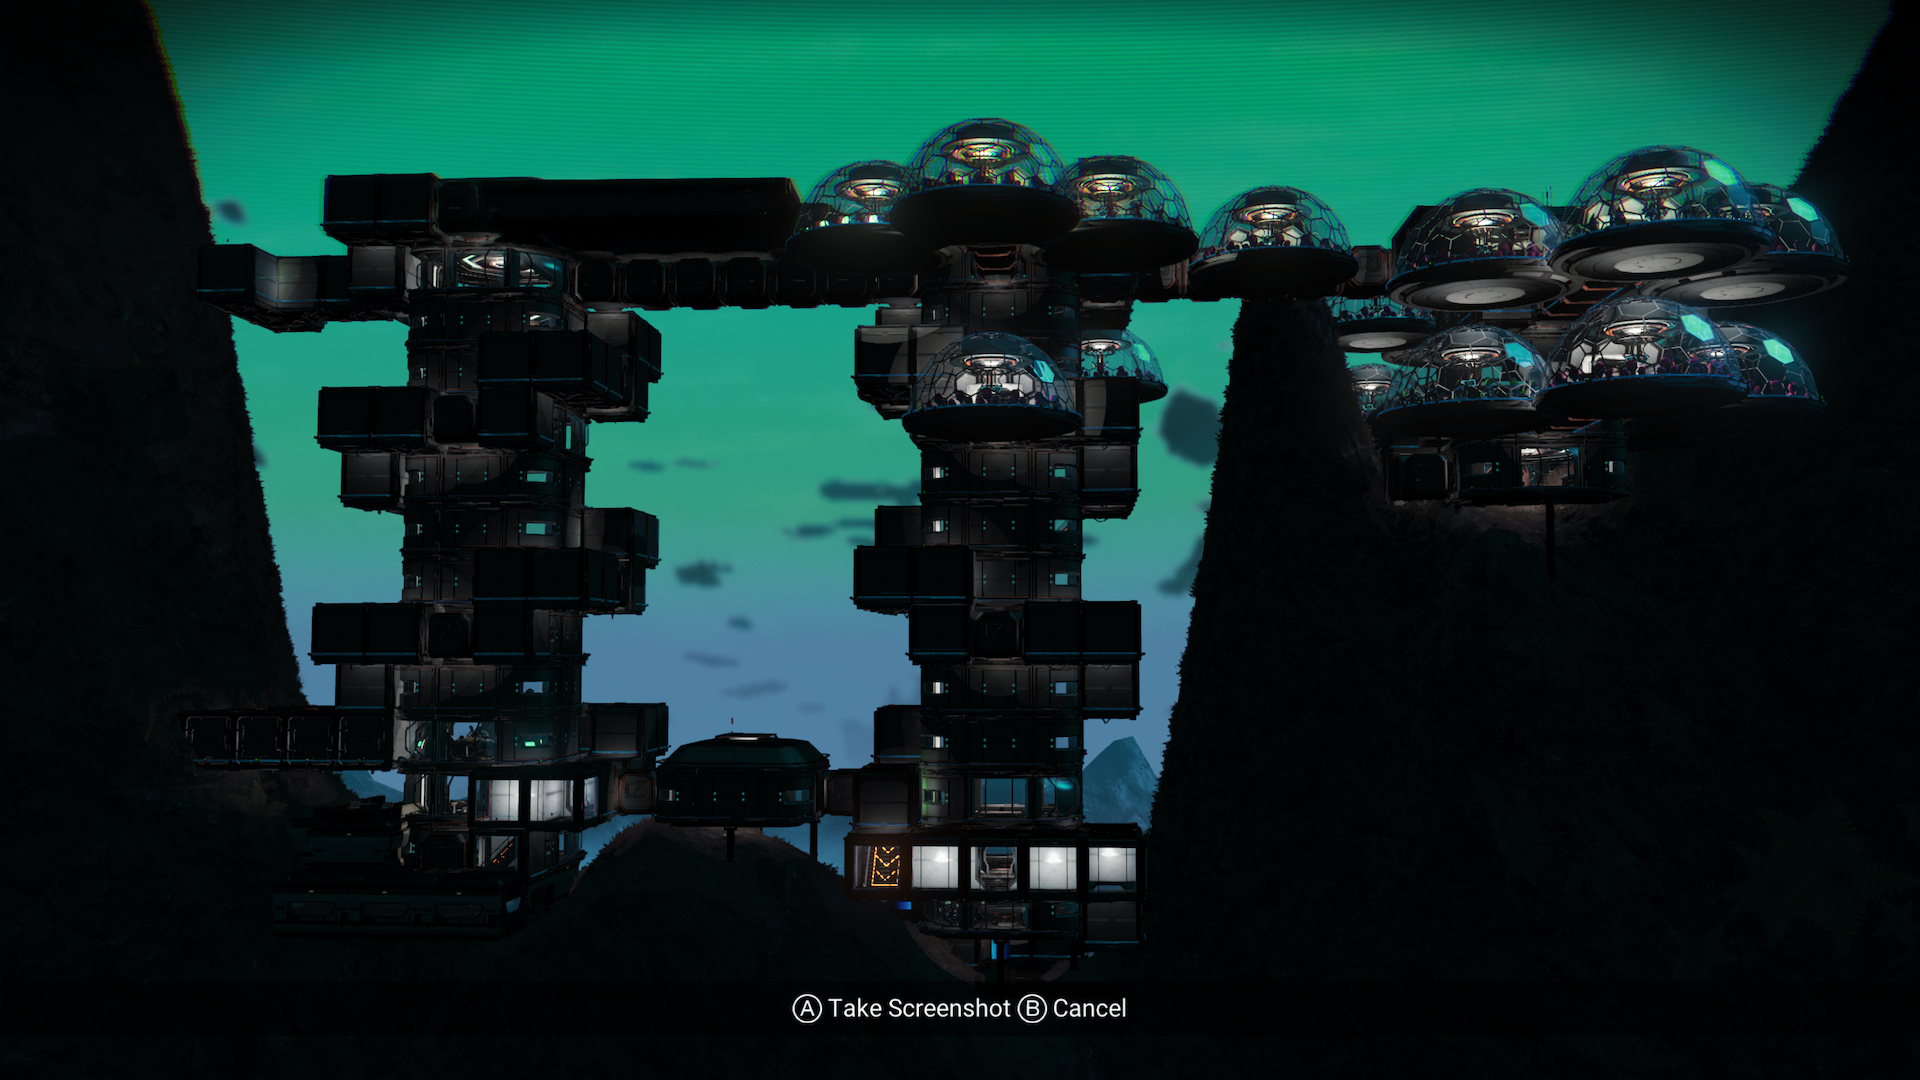 base screenshot (all images are taken directly from the game)